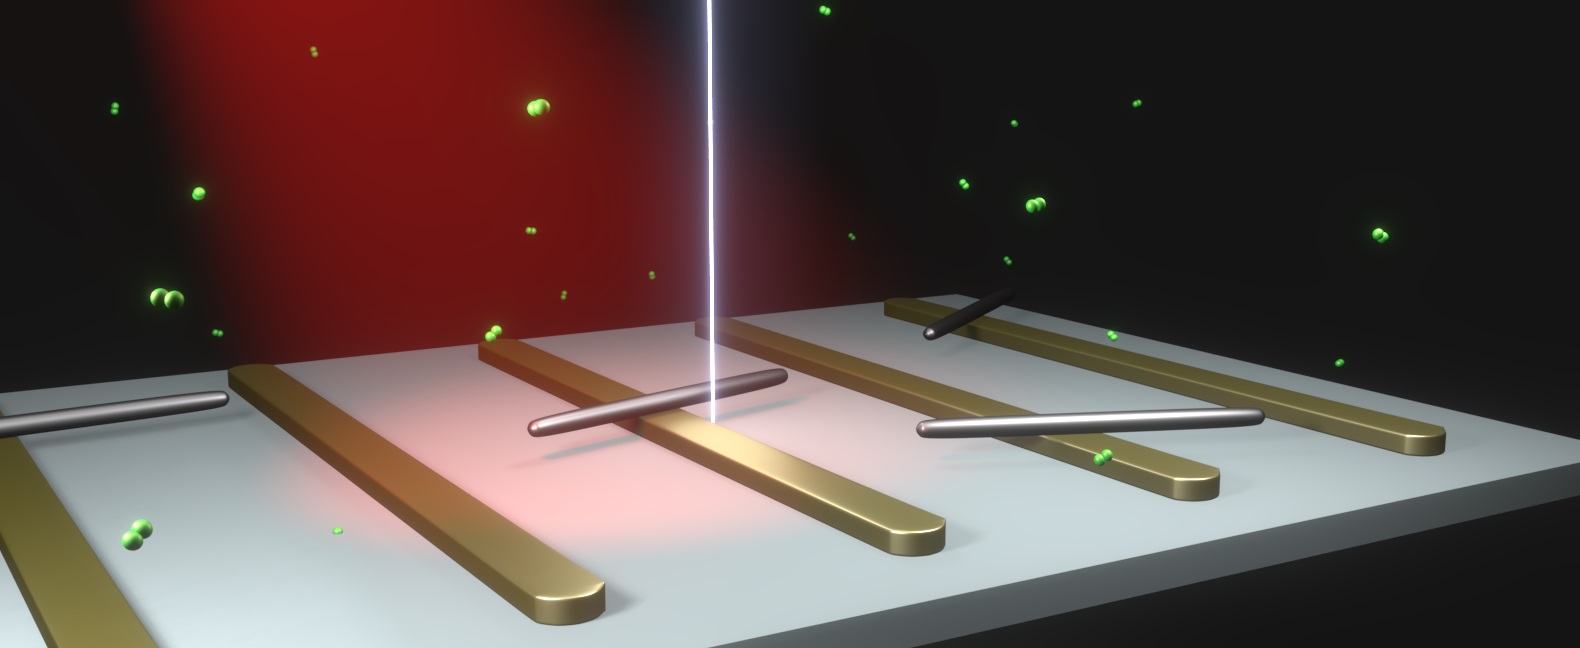 Depiction of the experimental setup where palladium nanorods lie atop gold nanobars. In this image, an electron beam is directed at the sample to watch the catalytic interactions between the hydrogen molecules (in green) and the palladium catalyst. The light driving the illumination is shown in red. Courtesy of Katherine Sytwu.